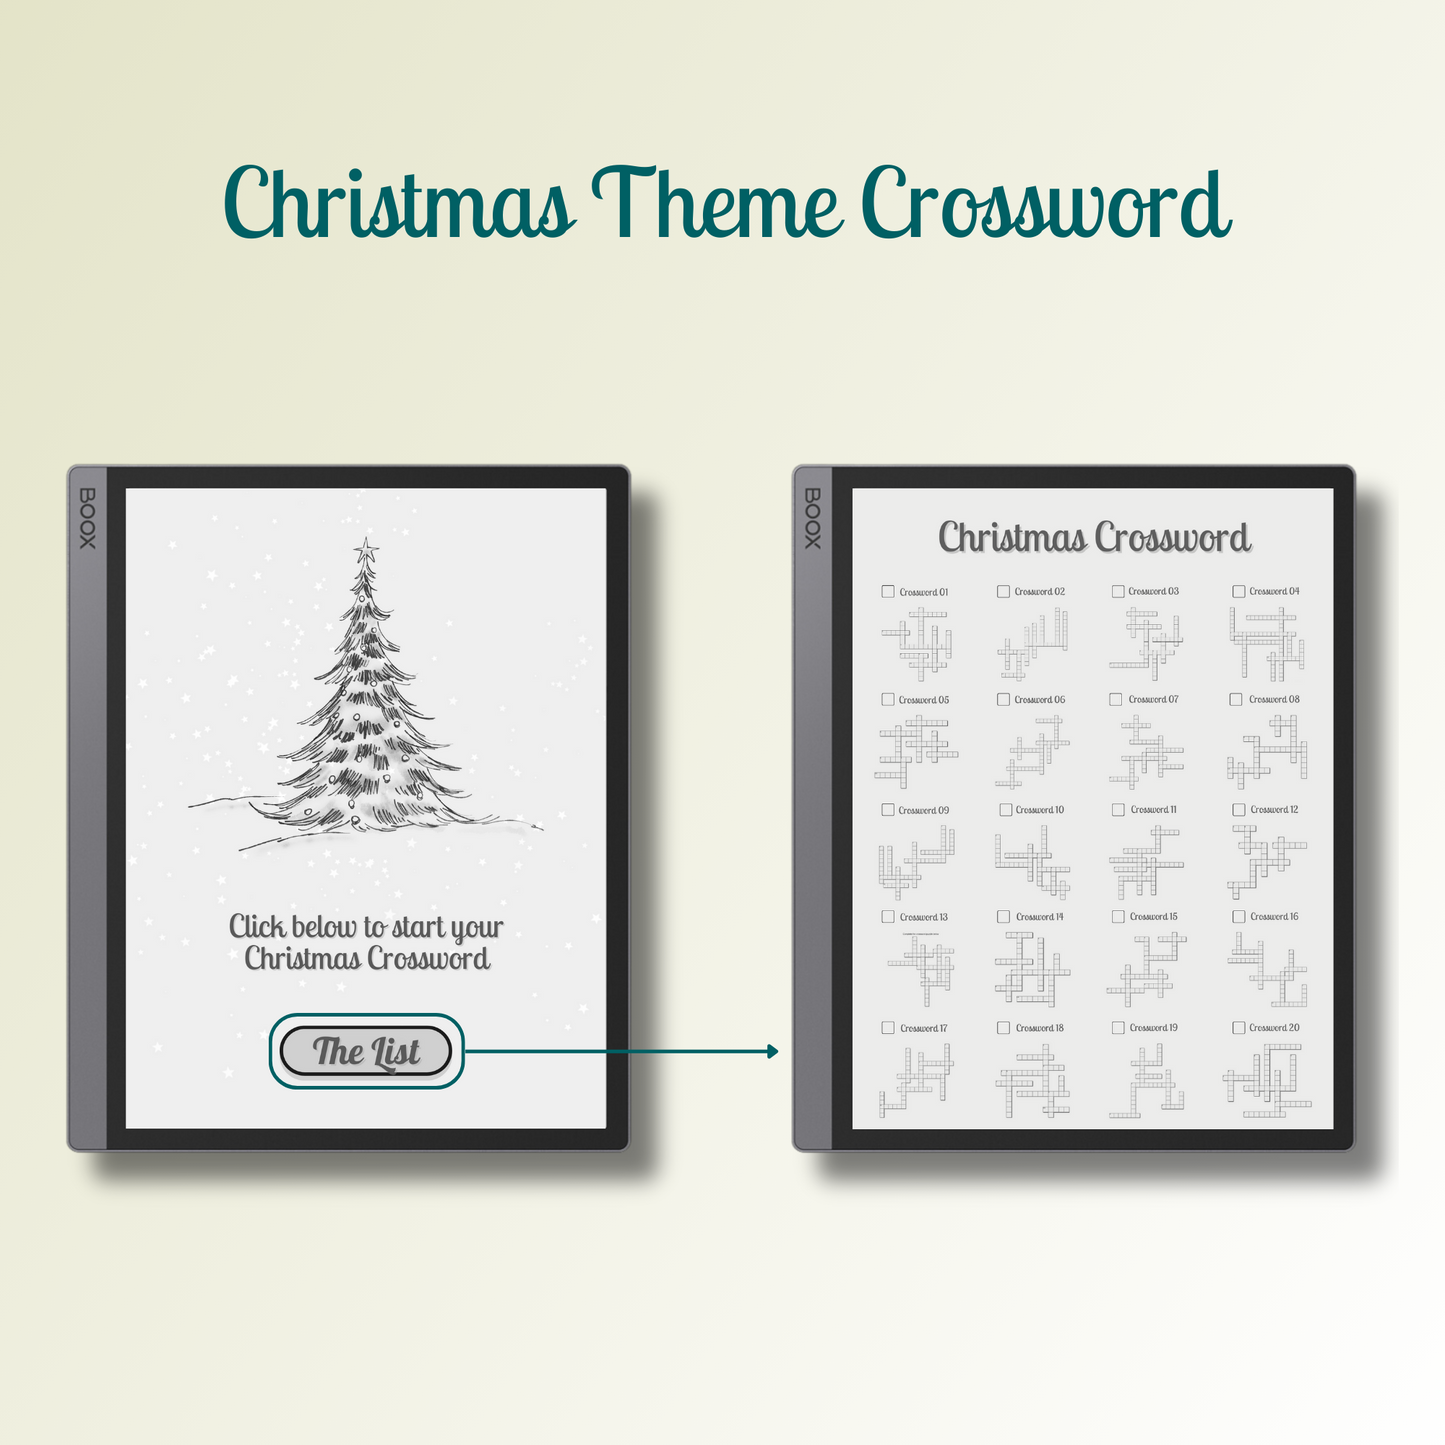 Onyx Boox Christmas Crossword in 3 different levels.